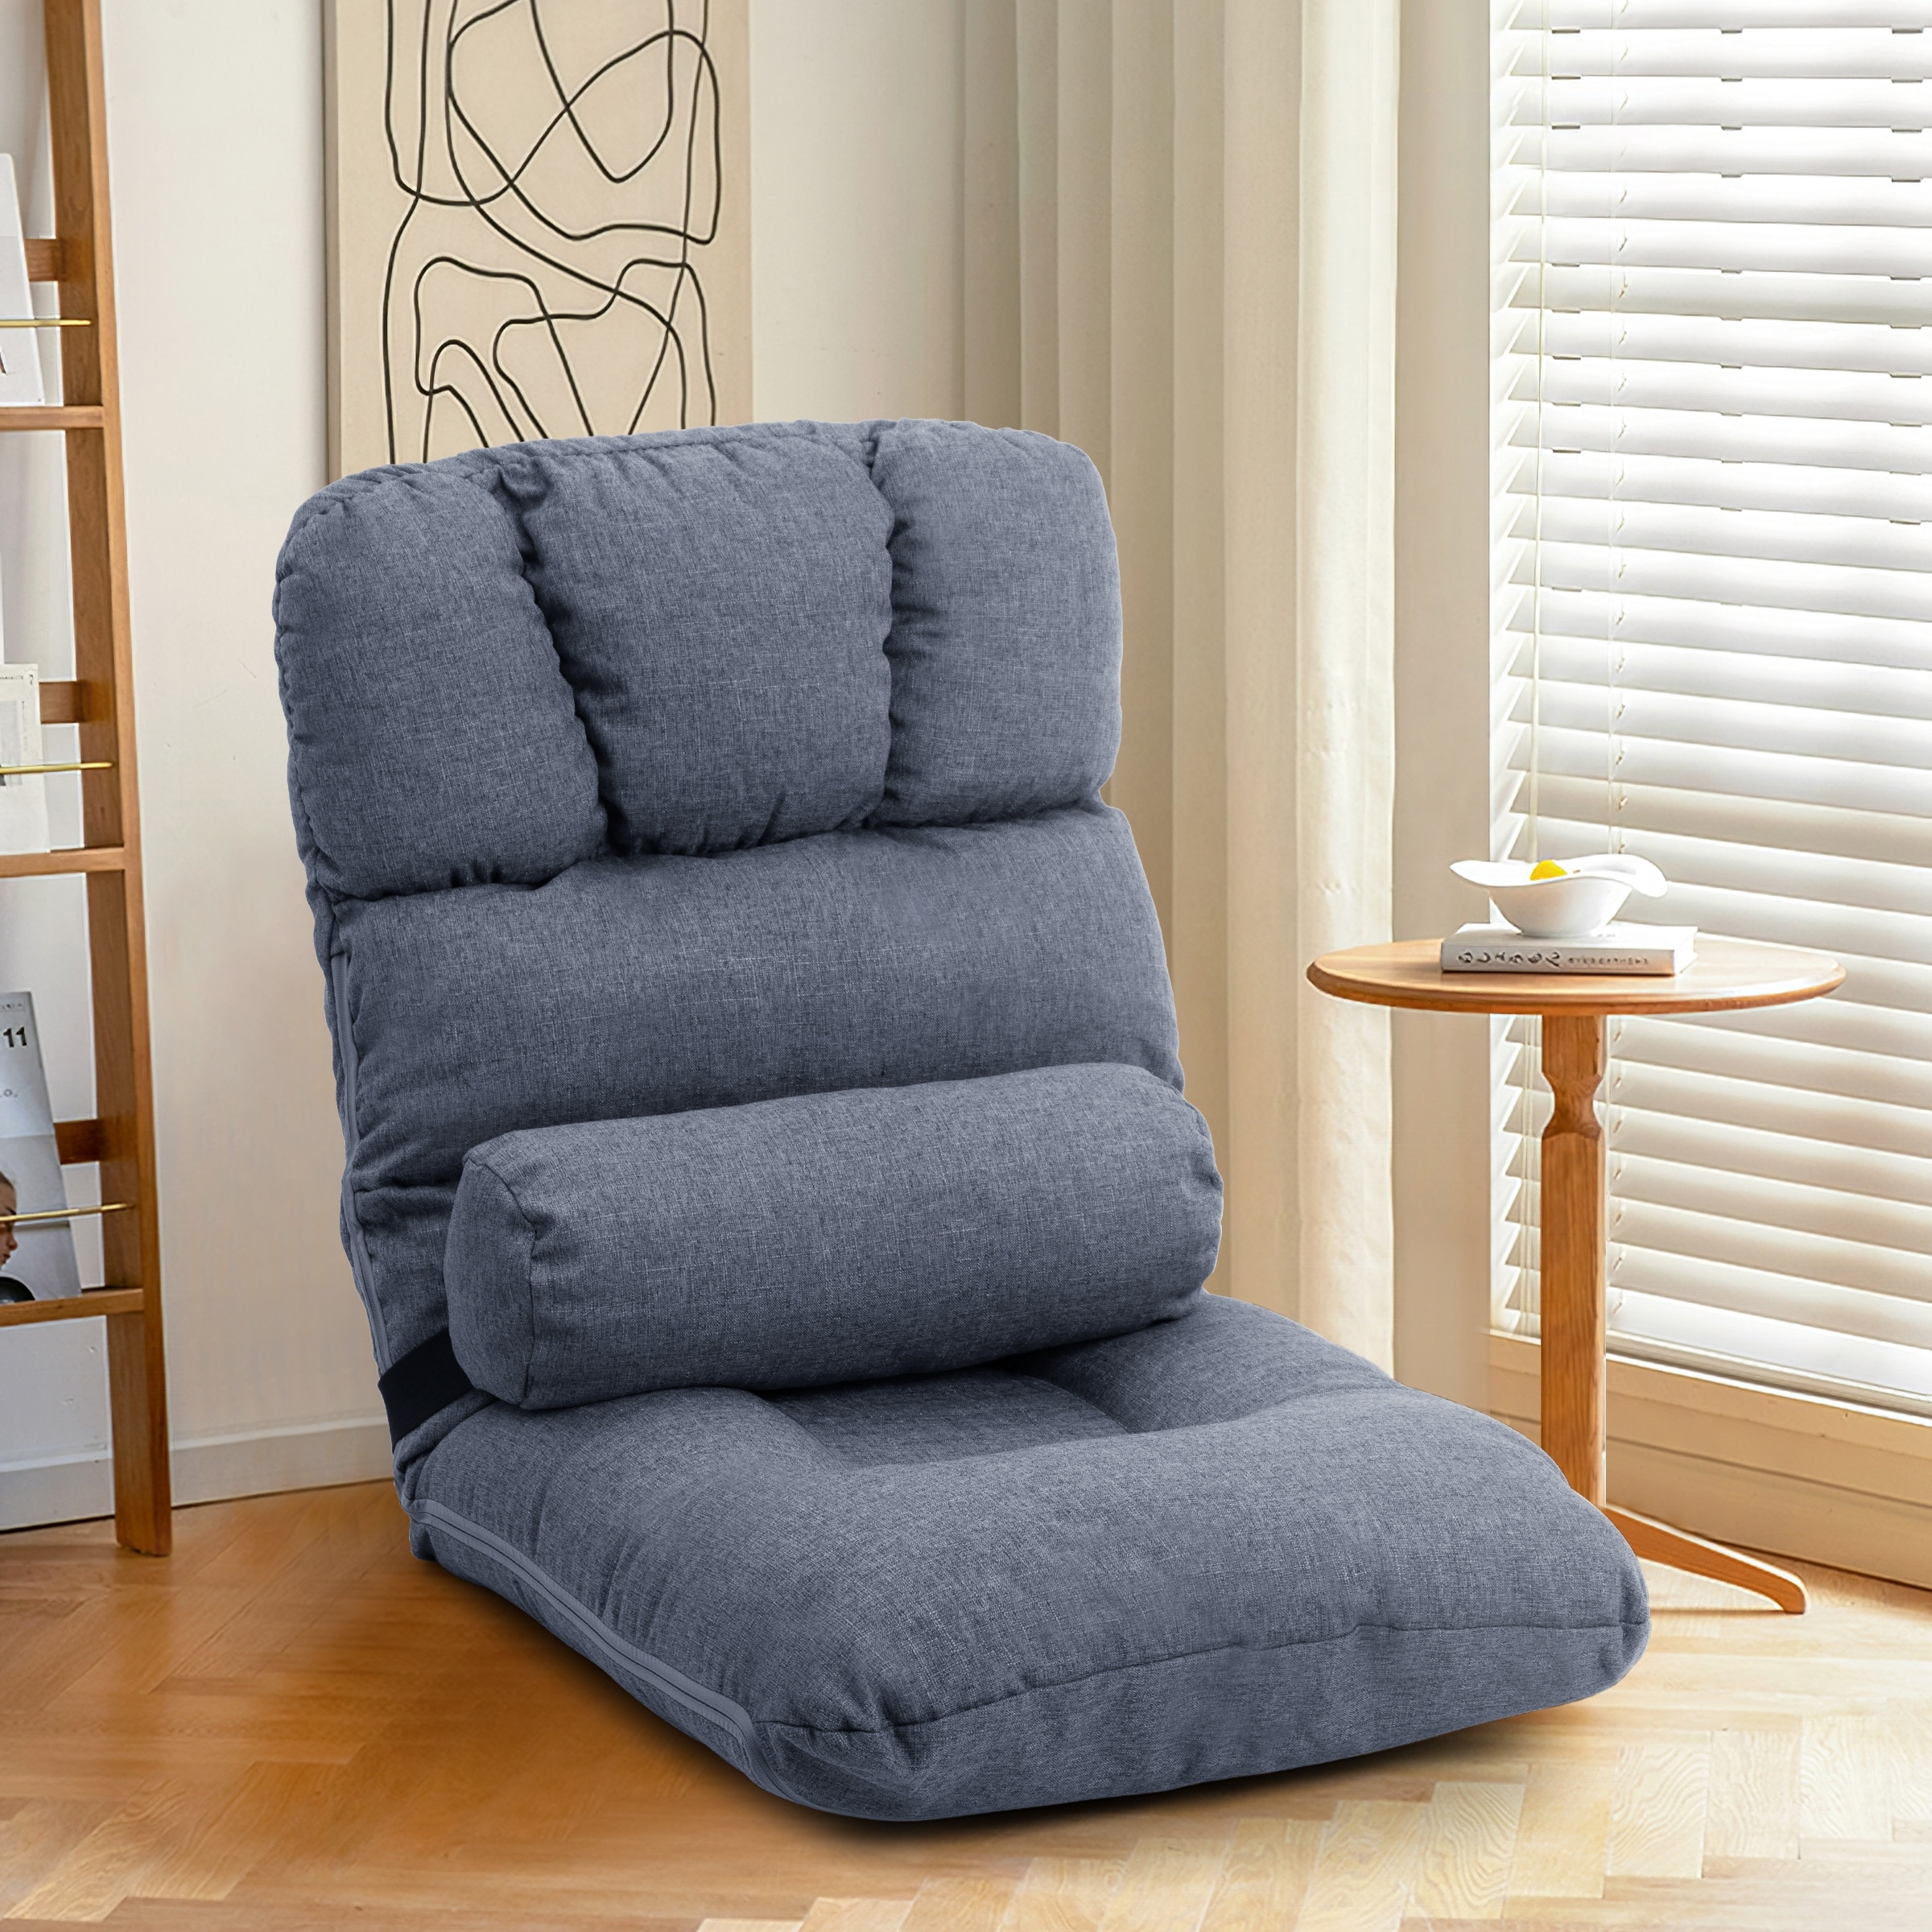 Floor Chair with Back Support, Folding Sofa Chair with 14 Adjustable  Position, Padded Sleeper Bed, Couch Recliner, Floor Gaming Chair,  Meditation